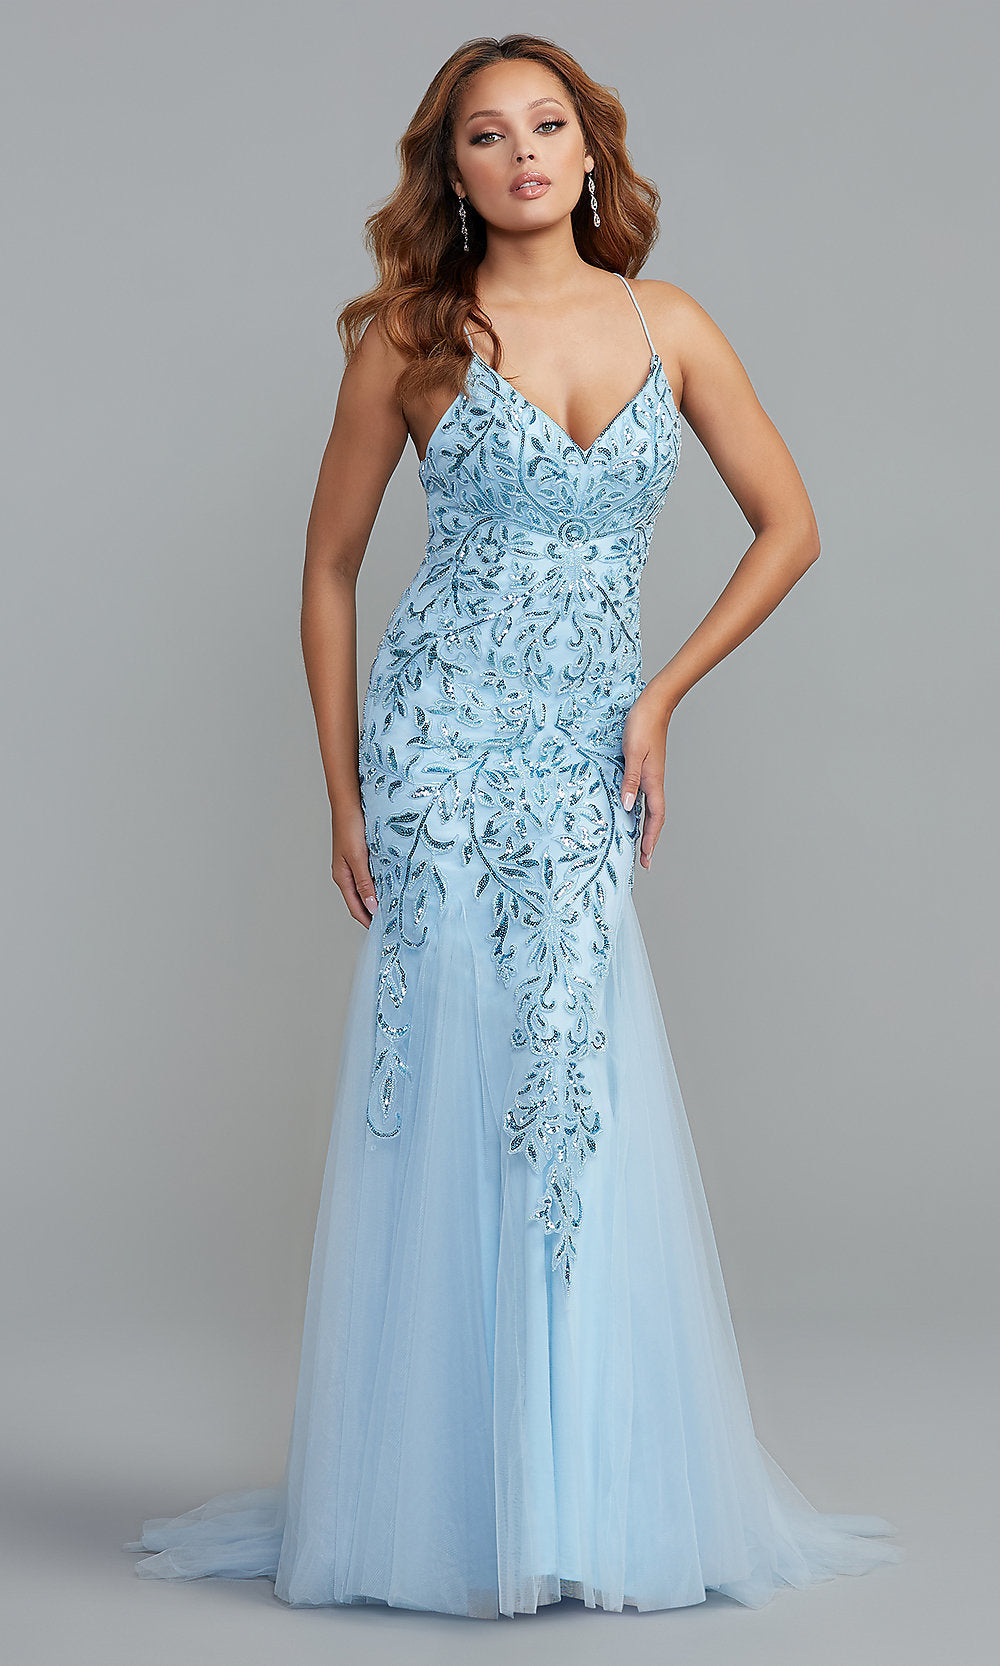 Long Sequin Formal Sparkly Prom Dress - PromGirl